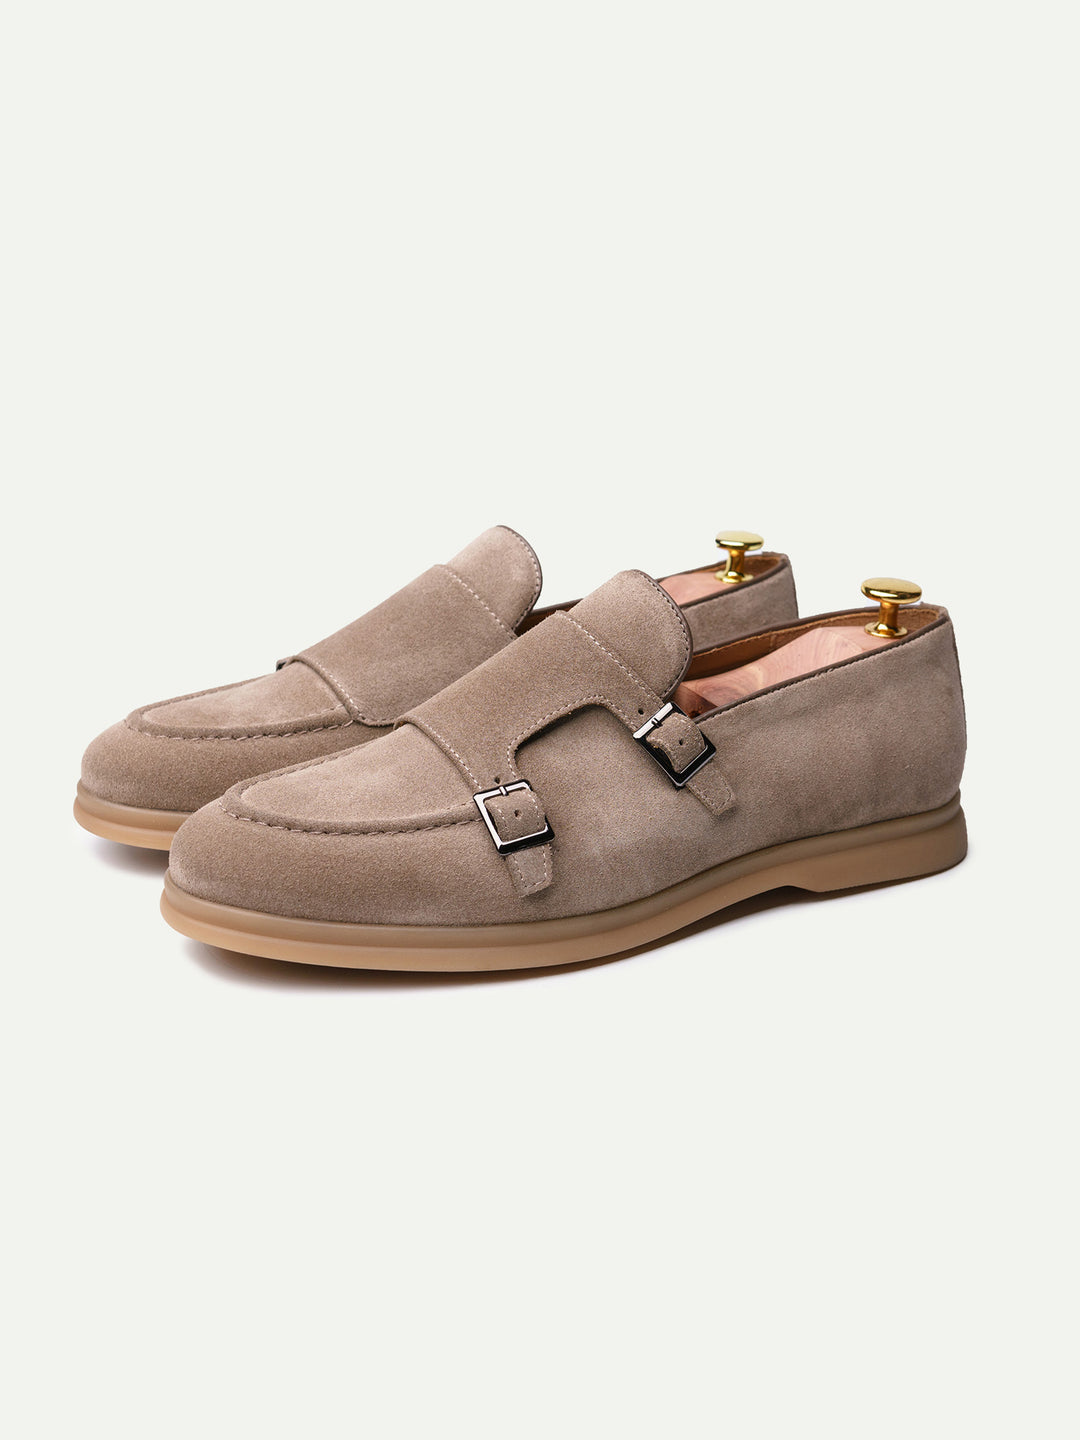 Monk Strap loafers